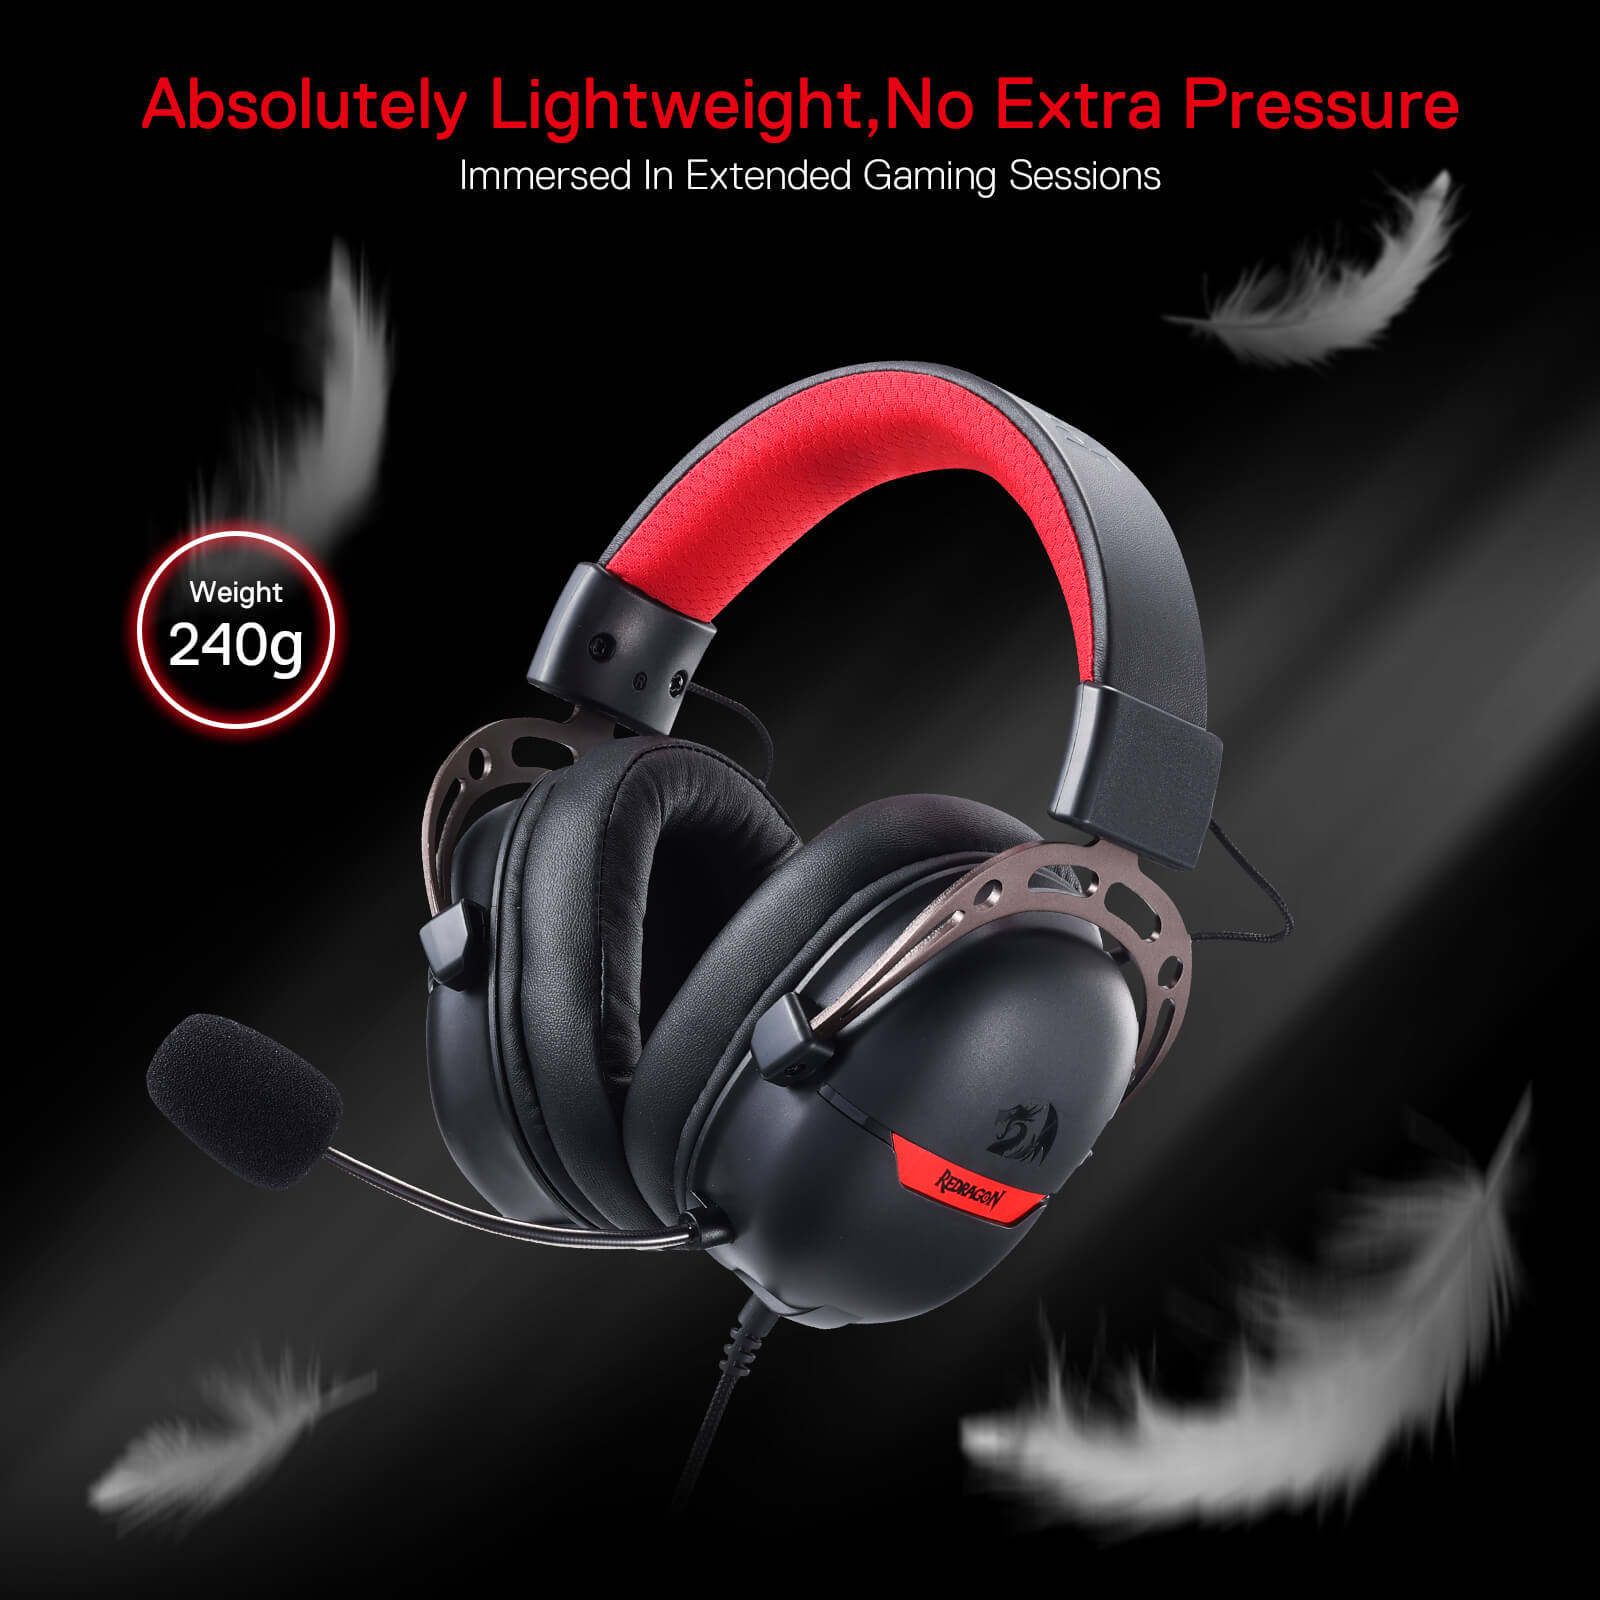 Redragon H376 Aurora Wired Gaming Headset, Virtual 7.1 Surround Sound, 40mm Drivers, in-line Control with EQ Mode, Over-Ear Headphones Works for PC/PS5/NS